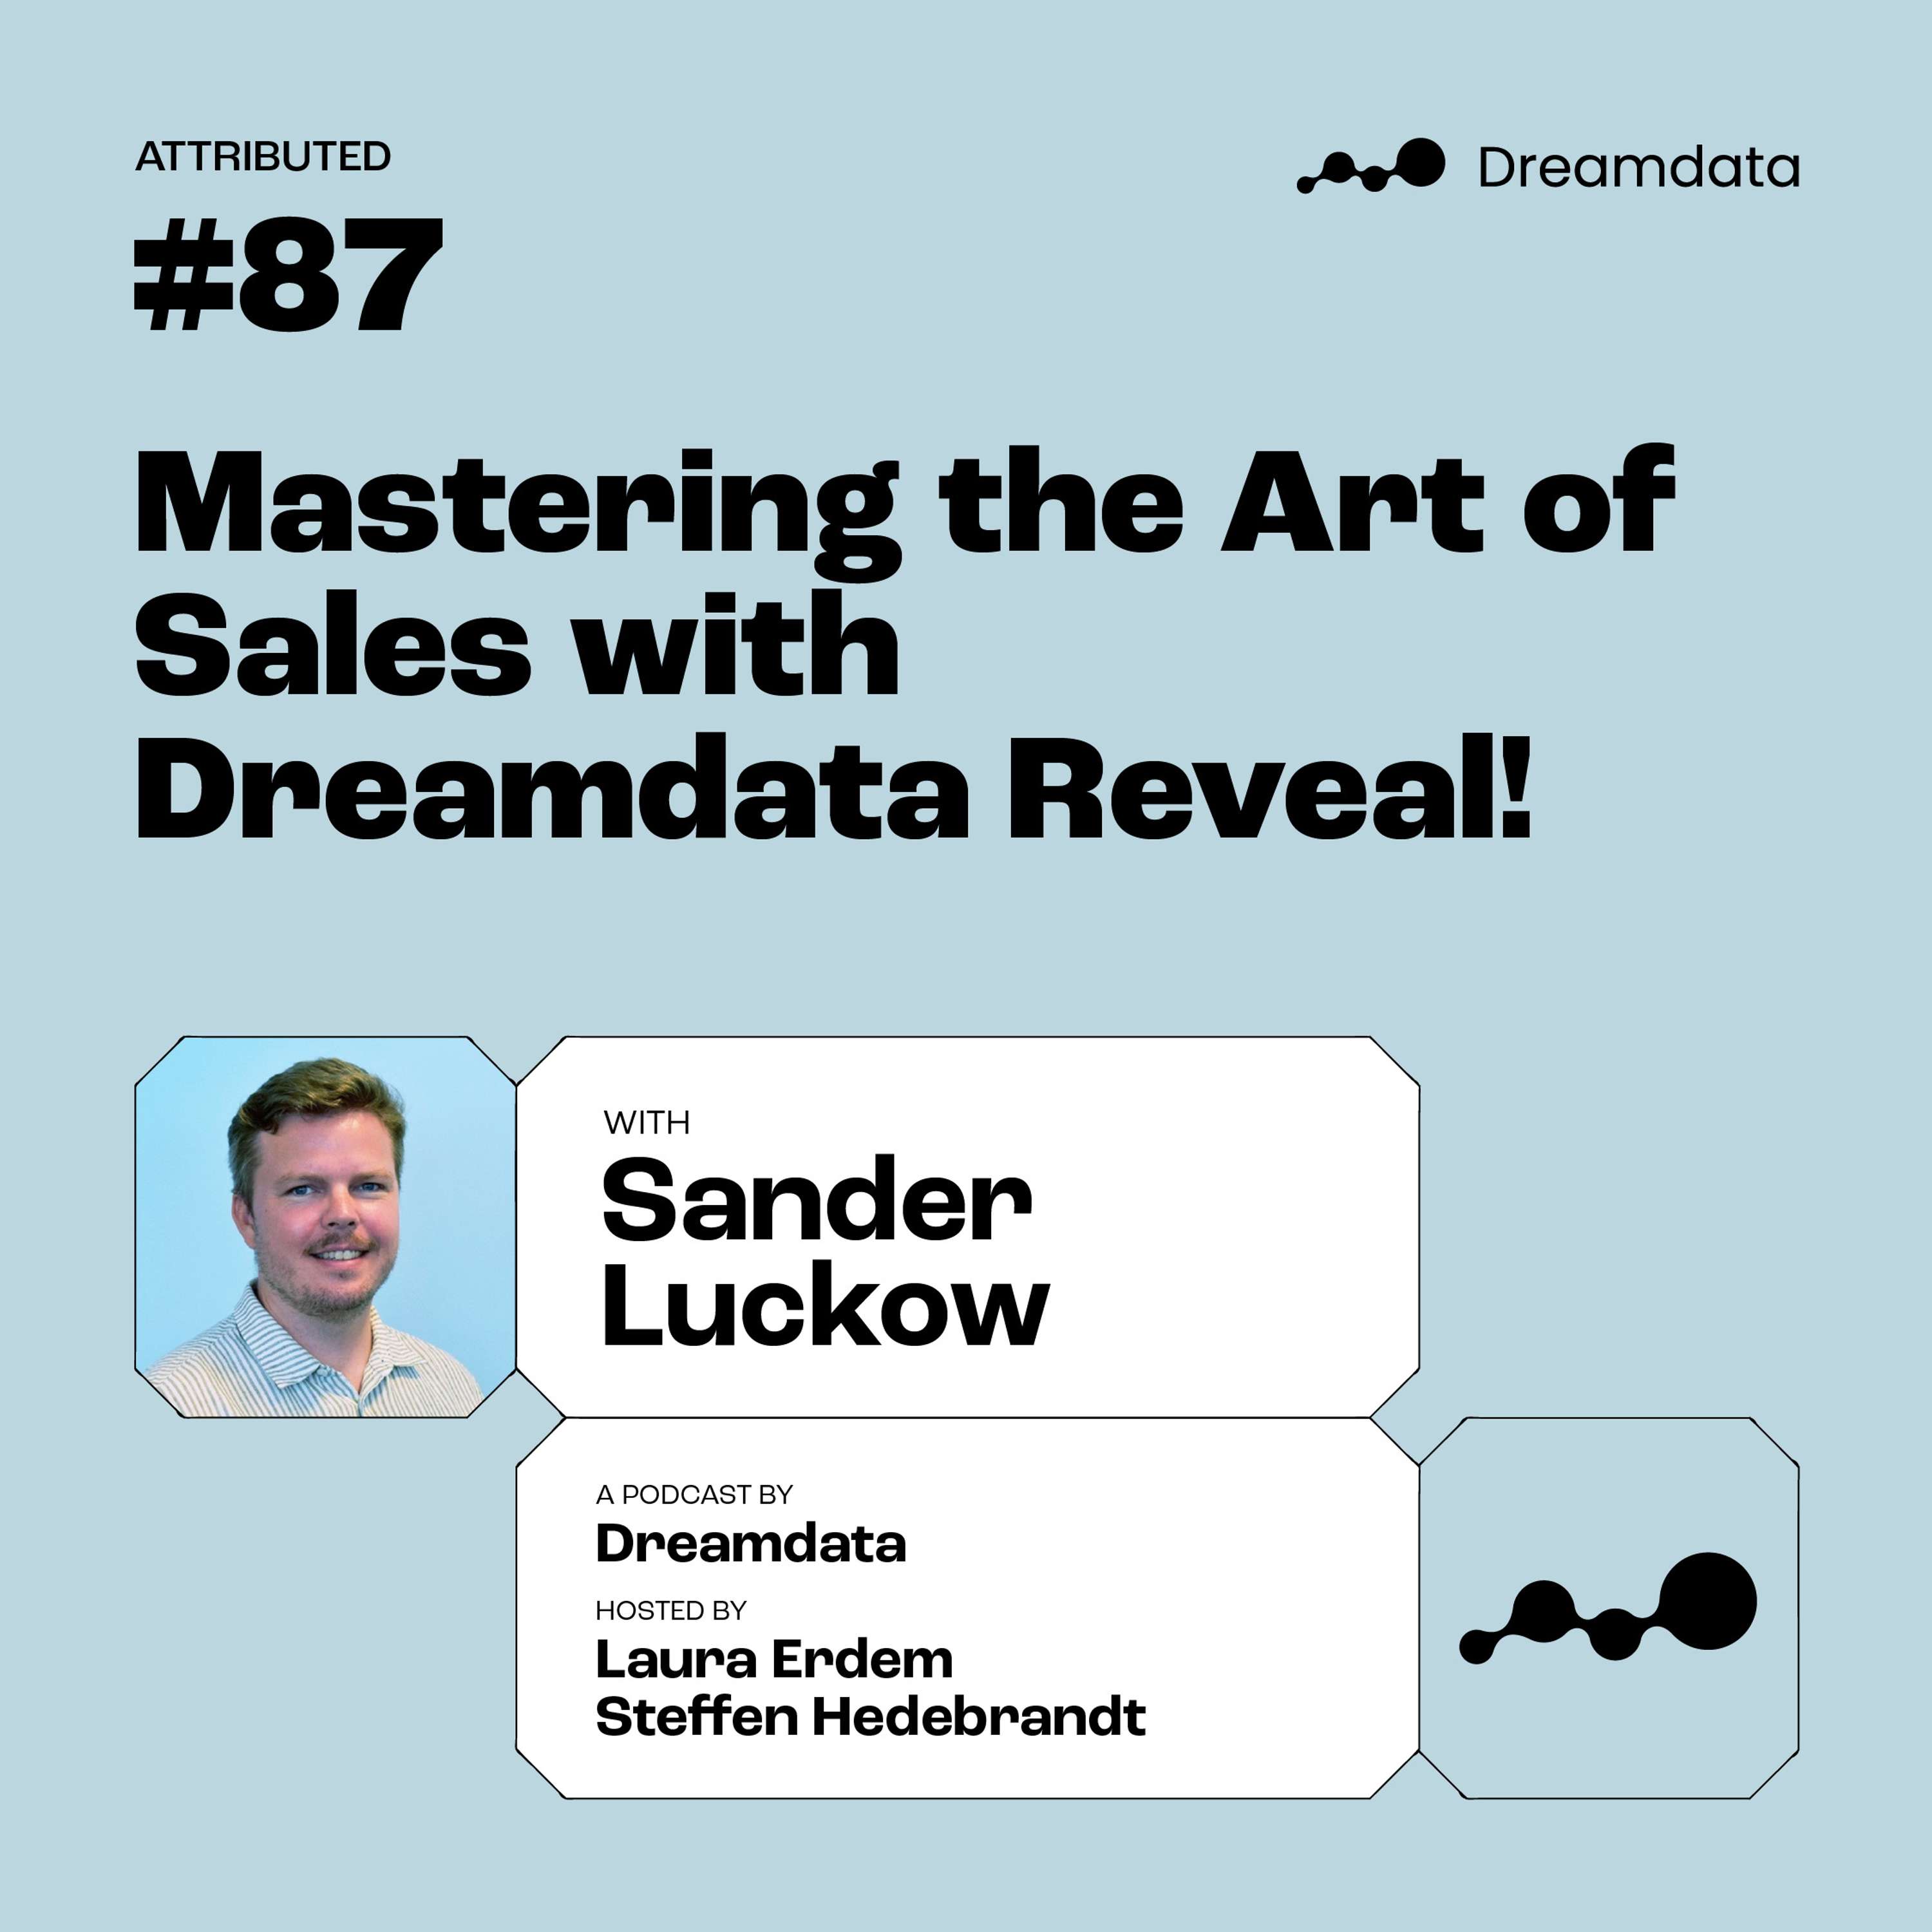 Mastering the Art of Sales with Dreamdata Reveal!